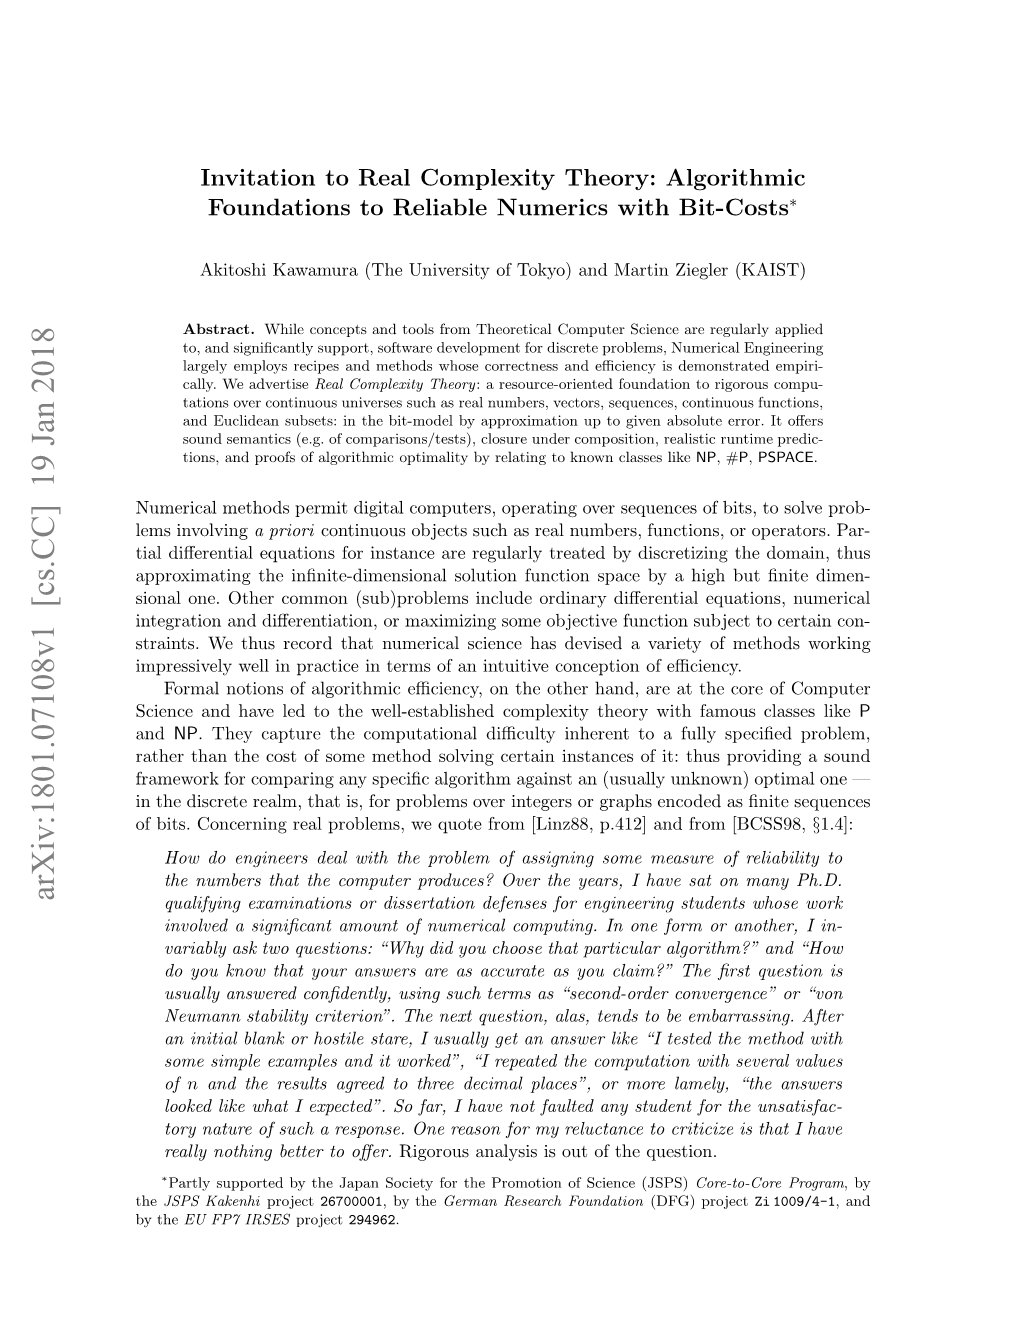 Invitation to Real Complexity Theory: Algorithmic Foundations to Reliable Numerics with Bit-Costs